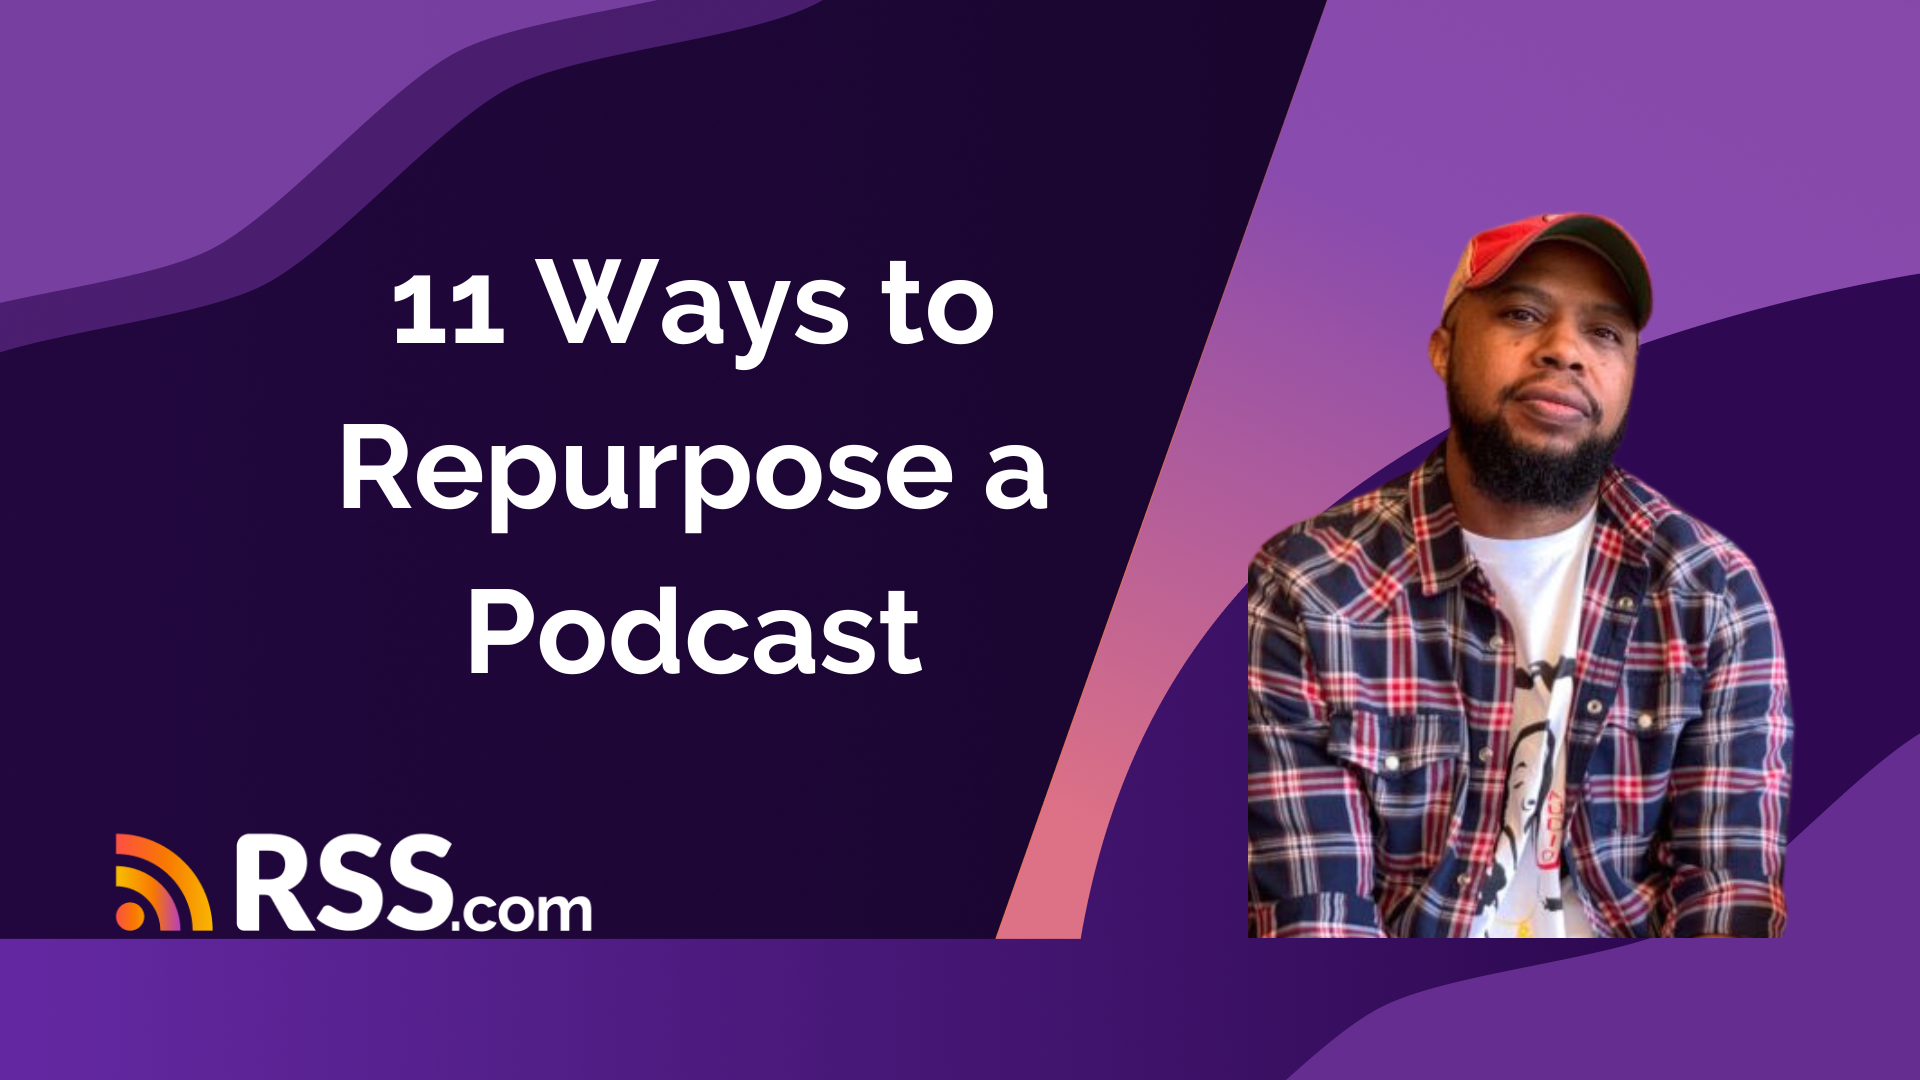 11 Ways to Repurpose a Podcast